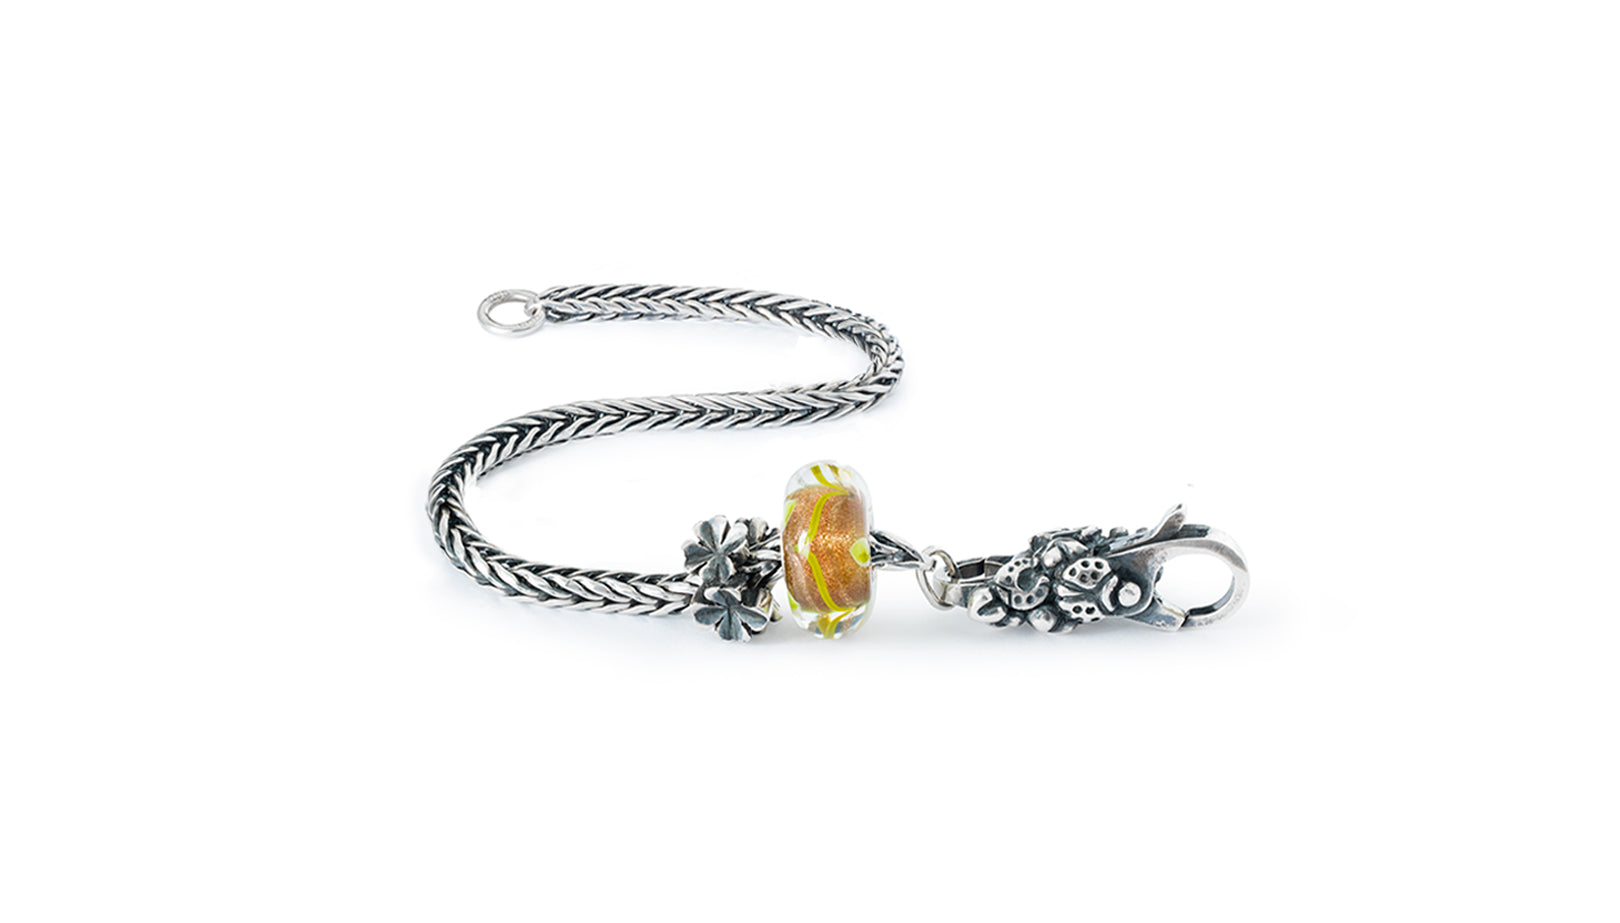 Fortune keepers Bracelet